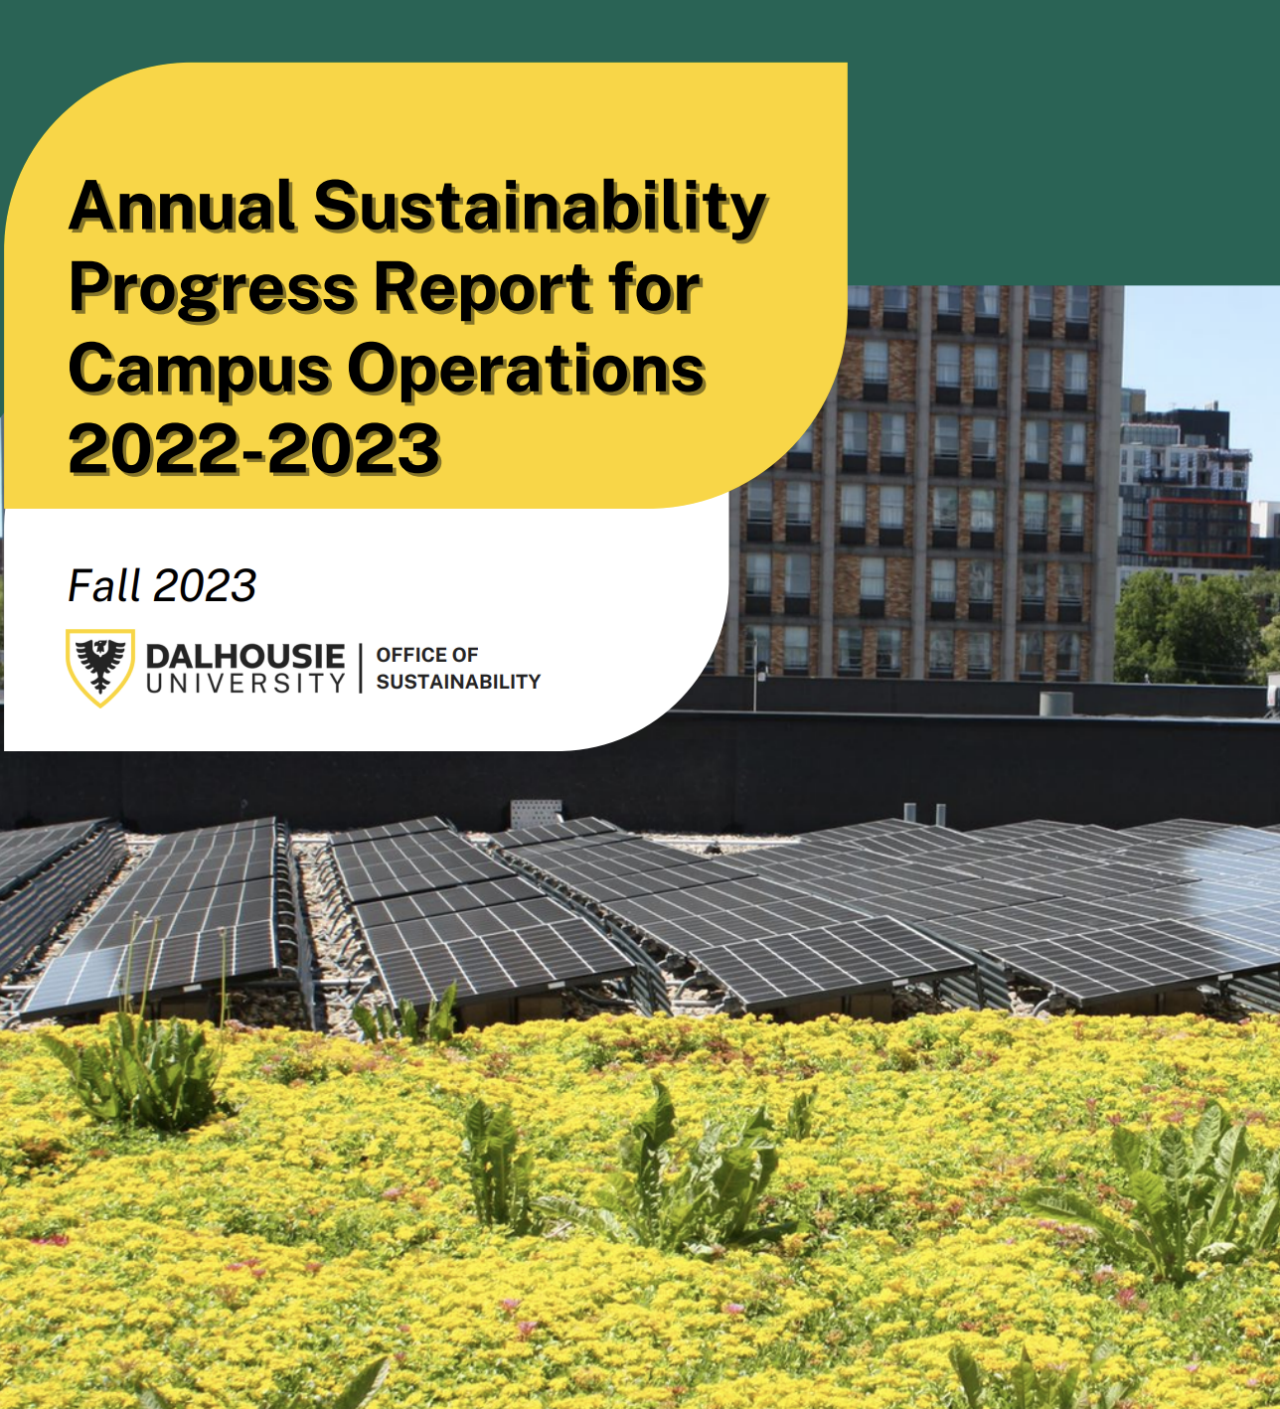 Annual Sustainability Progress Report for Campus Operations 2022-2023